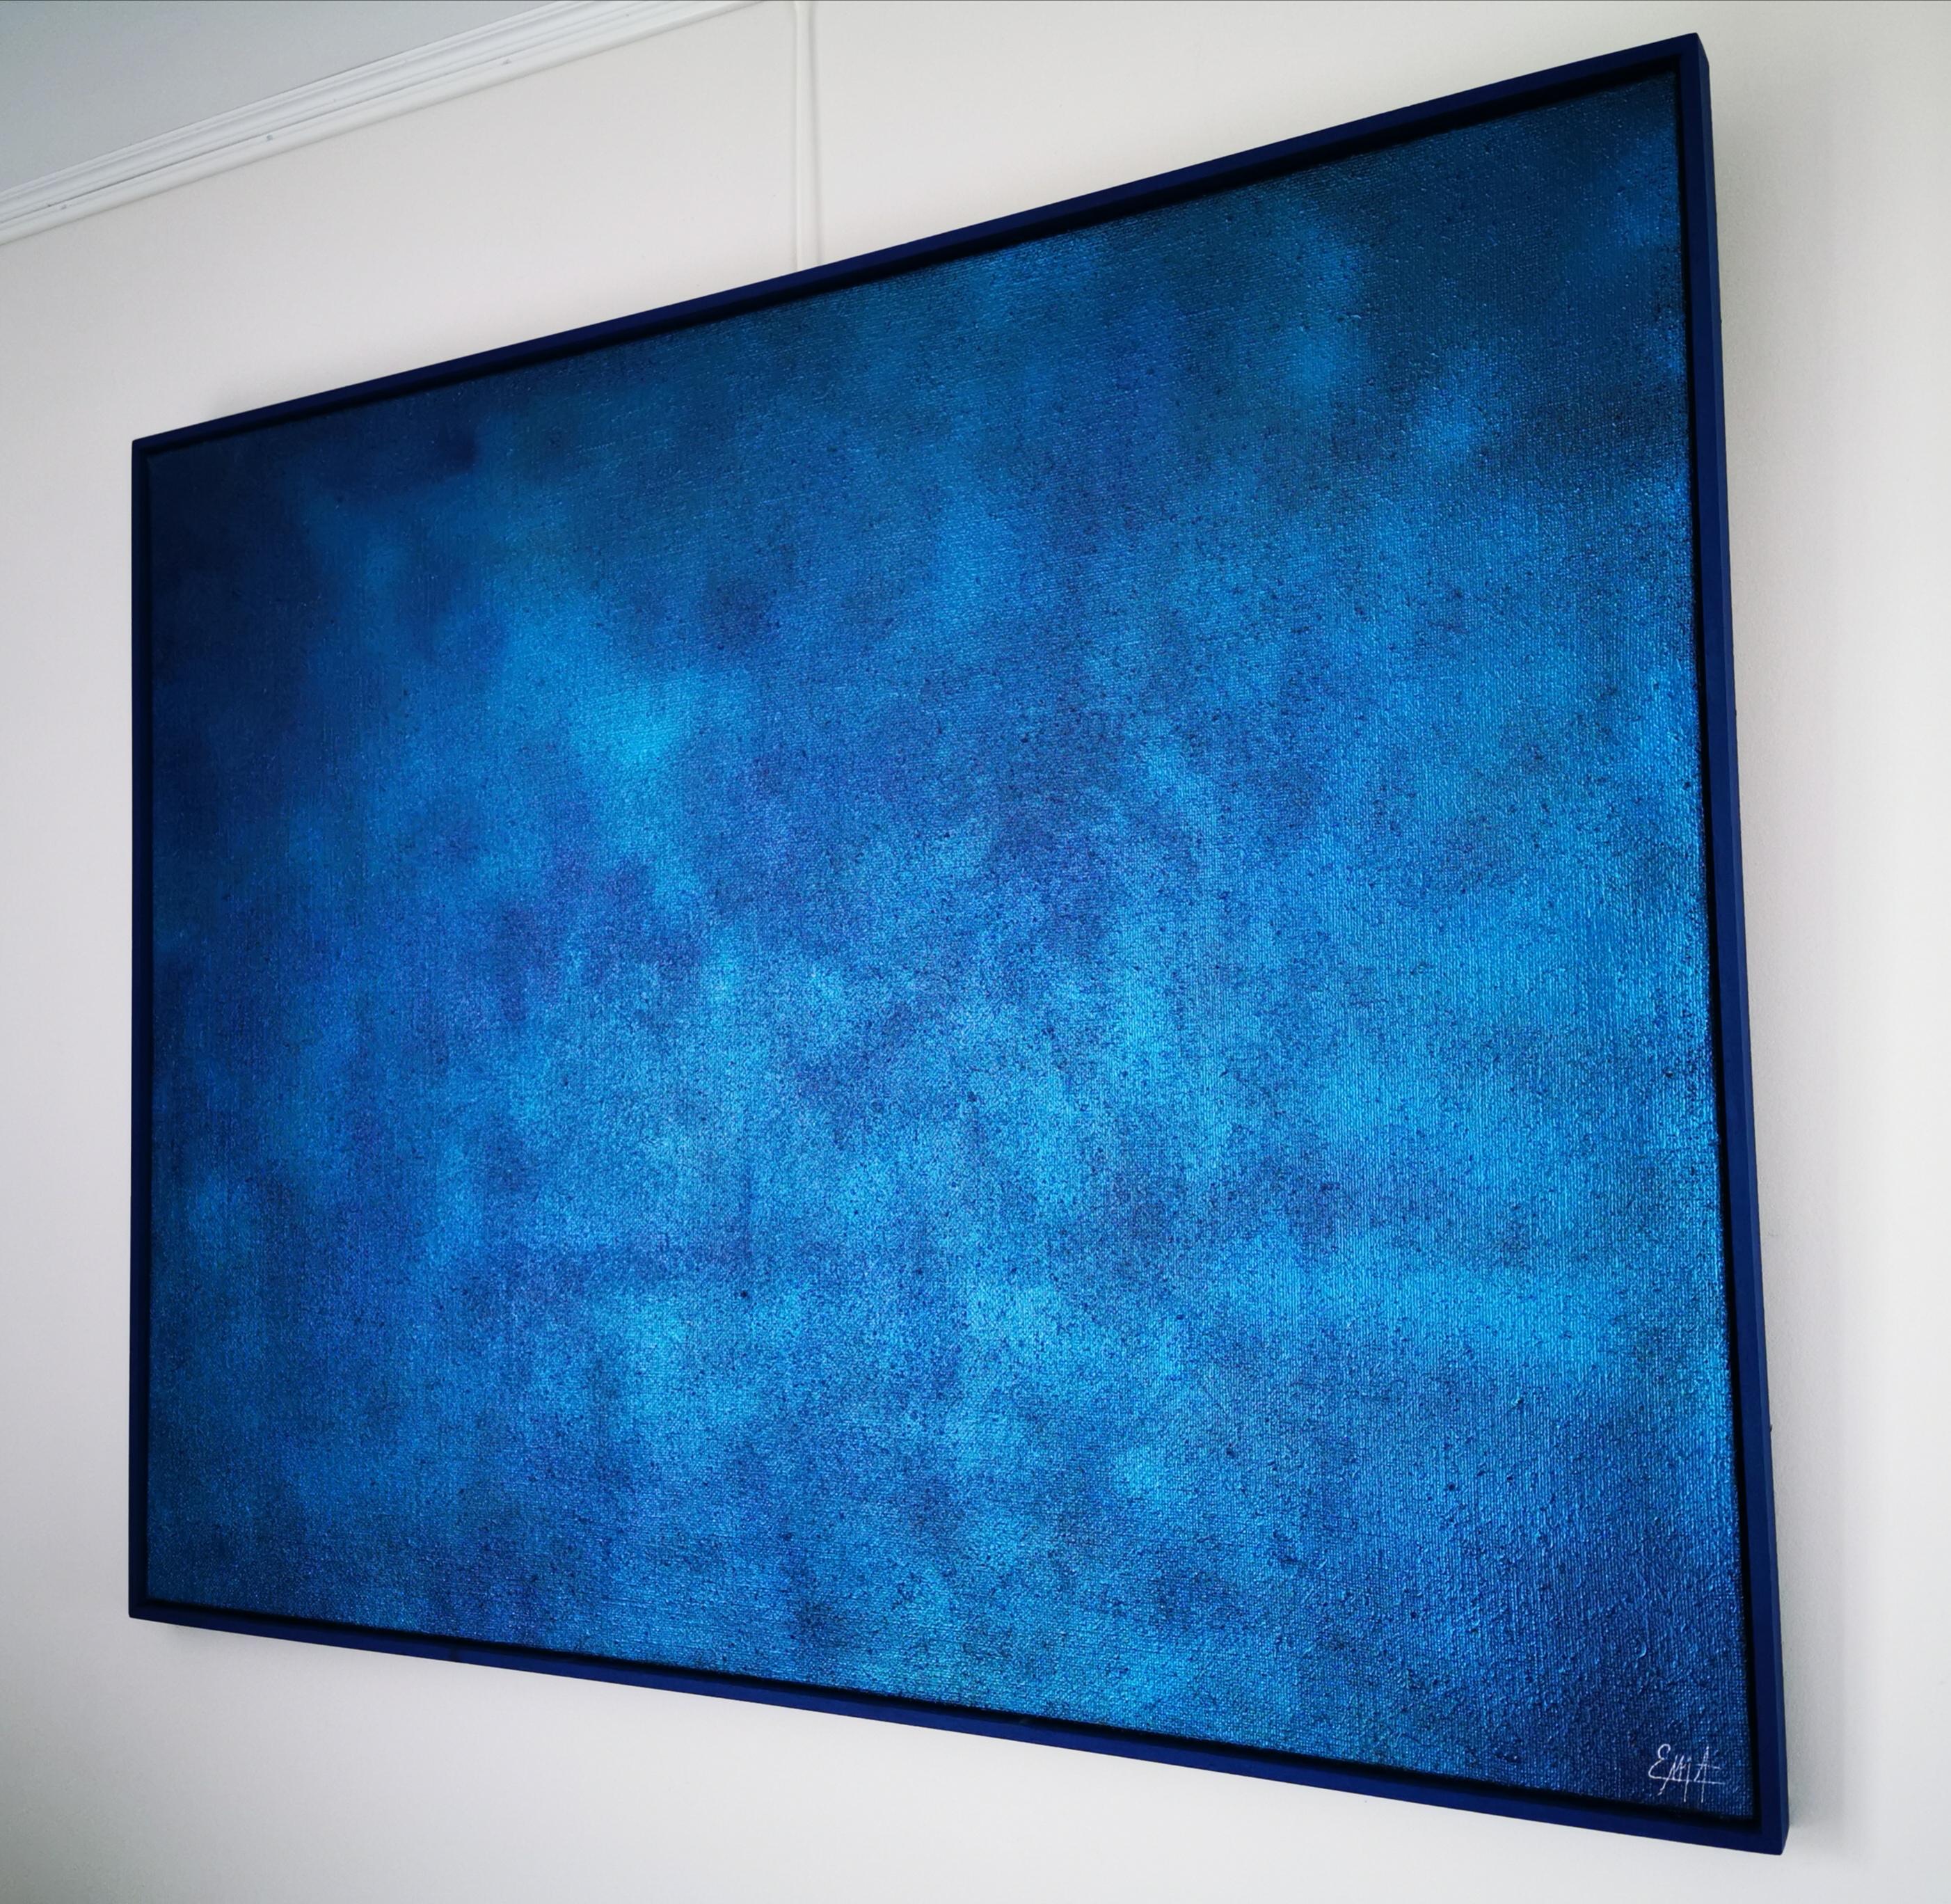 French Contemporary Art by Elodie Dollat - Monochrome Bleu III For Sale 1